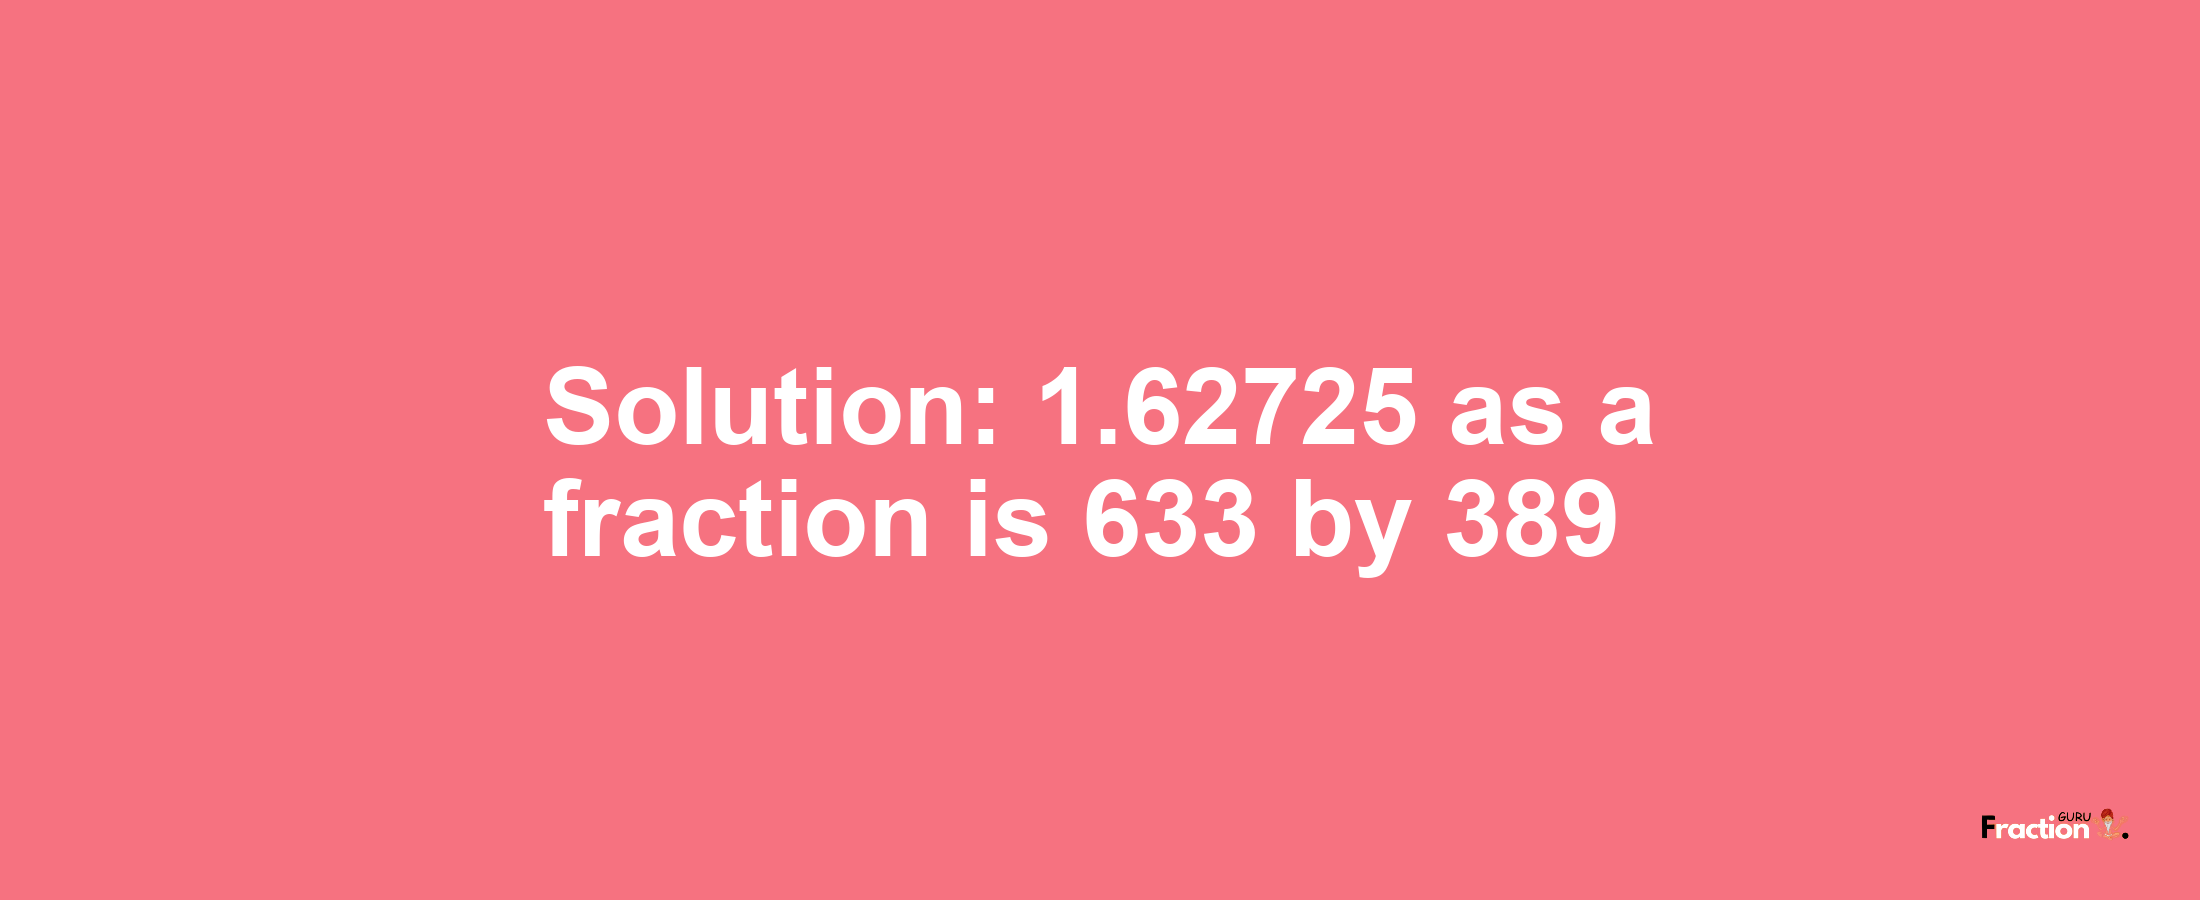 Solution:1.62725 as a fraction is 633/389